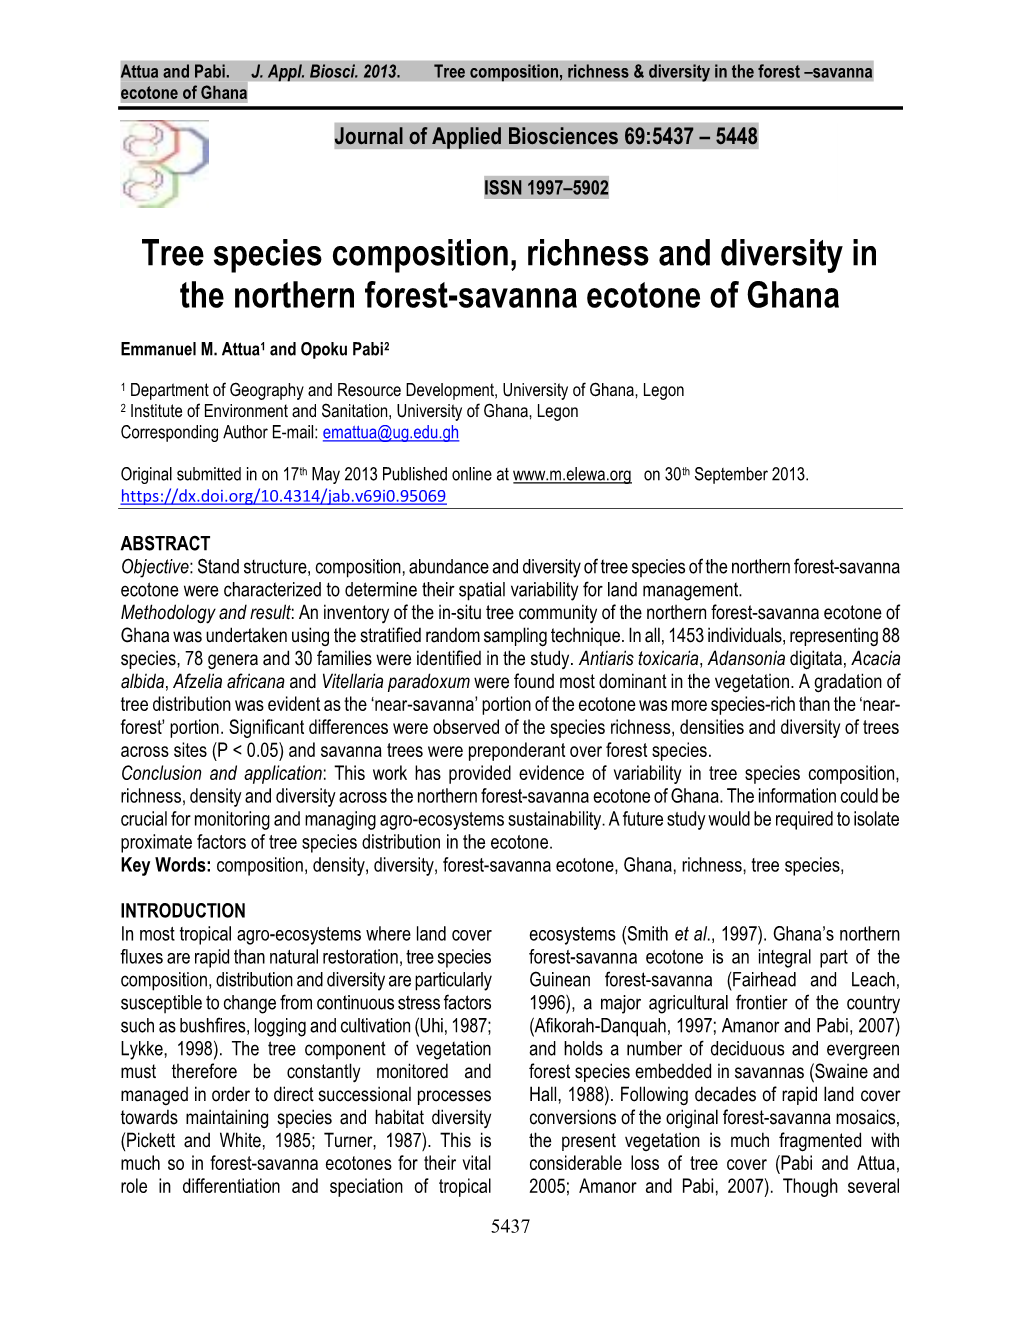 Tree Species Composition, Richness and Diversity in the Northern Forest-Savanna Ecotone of Ghana